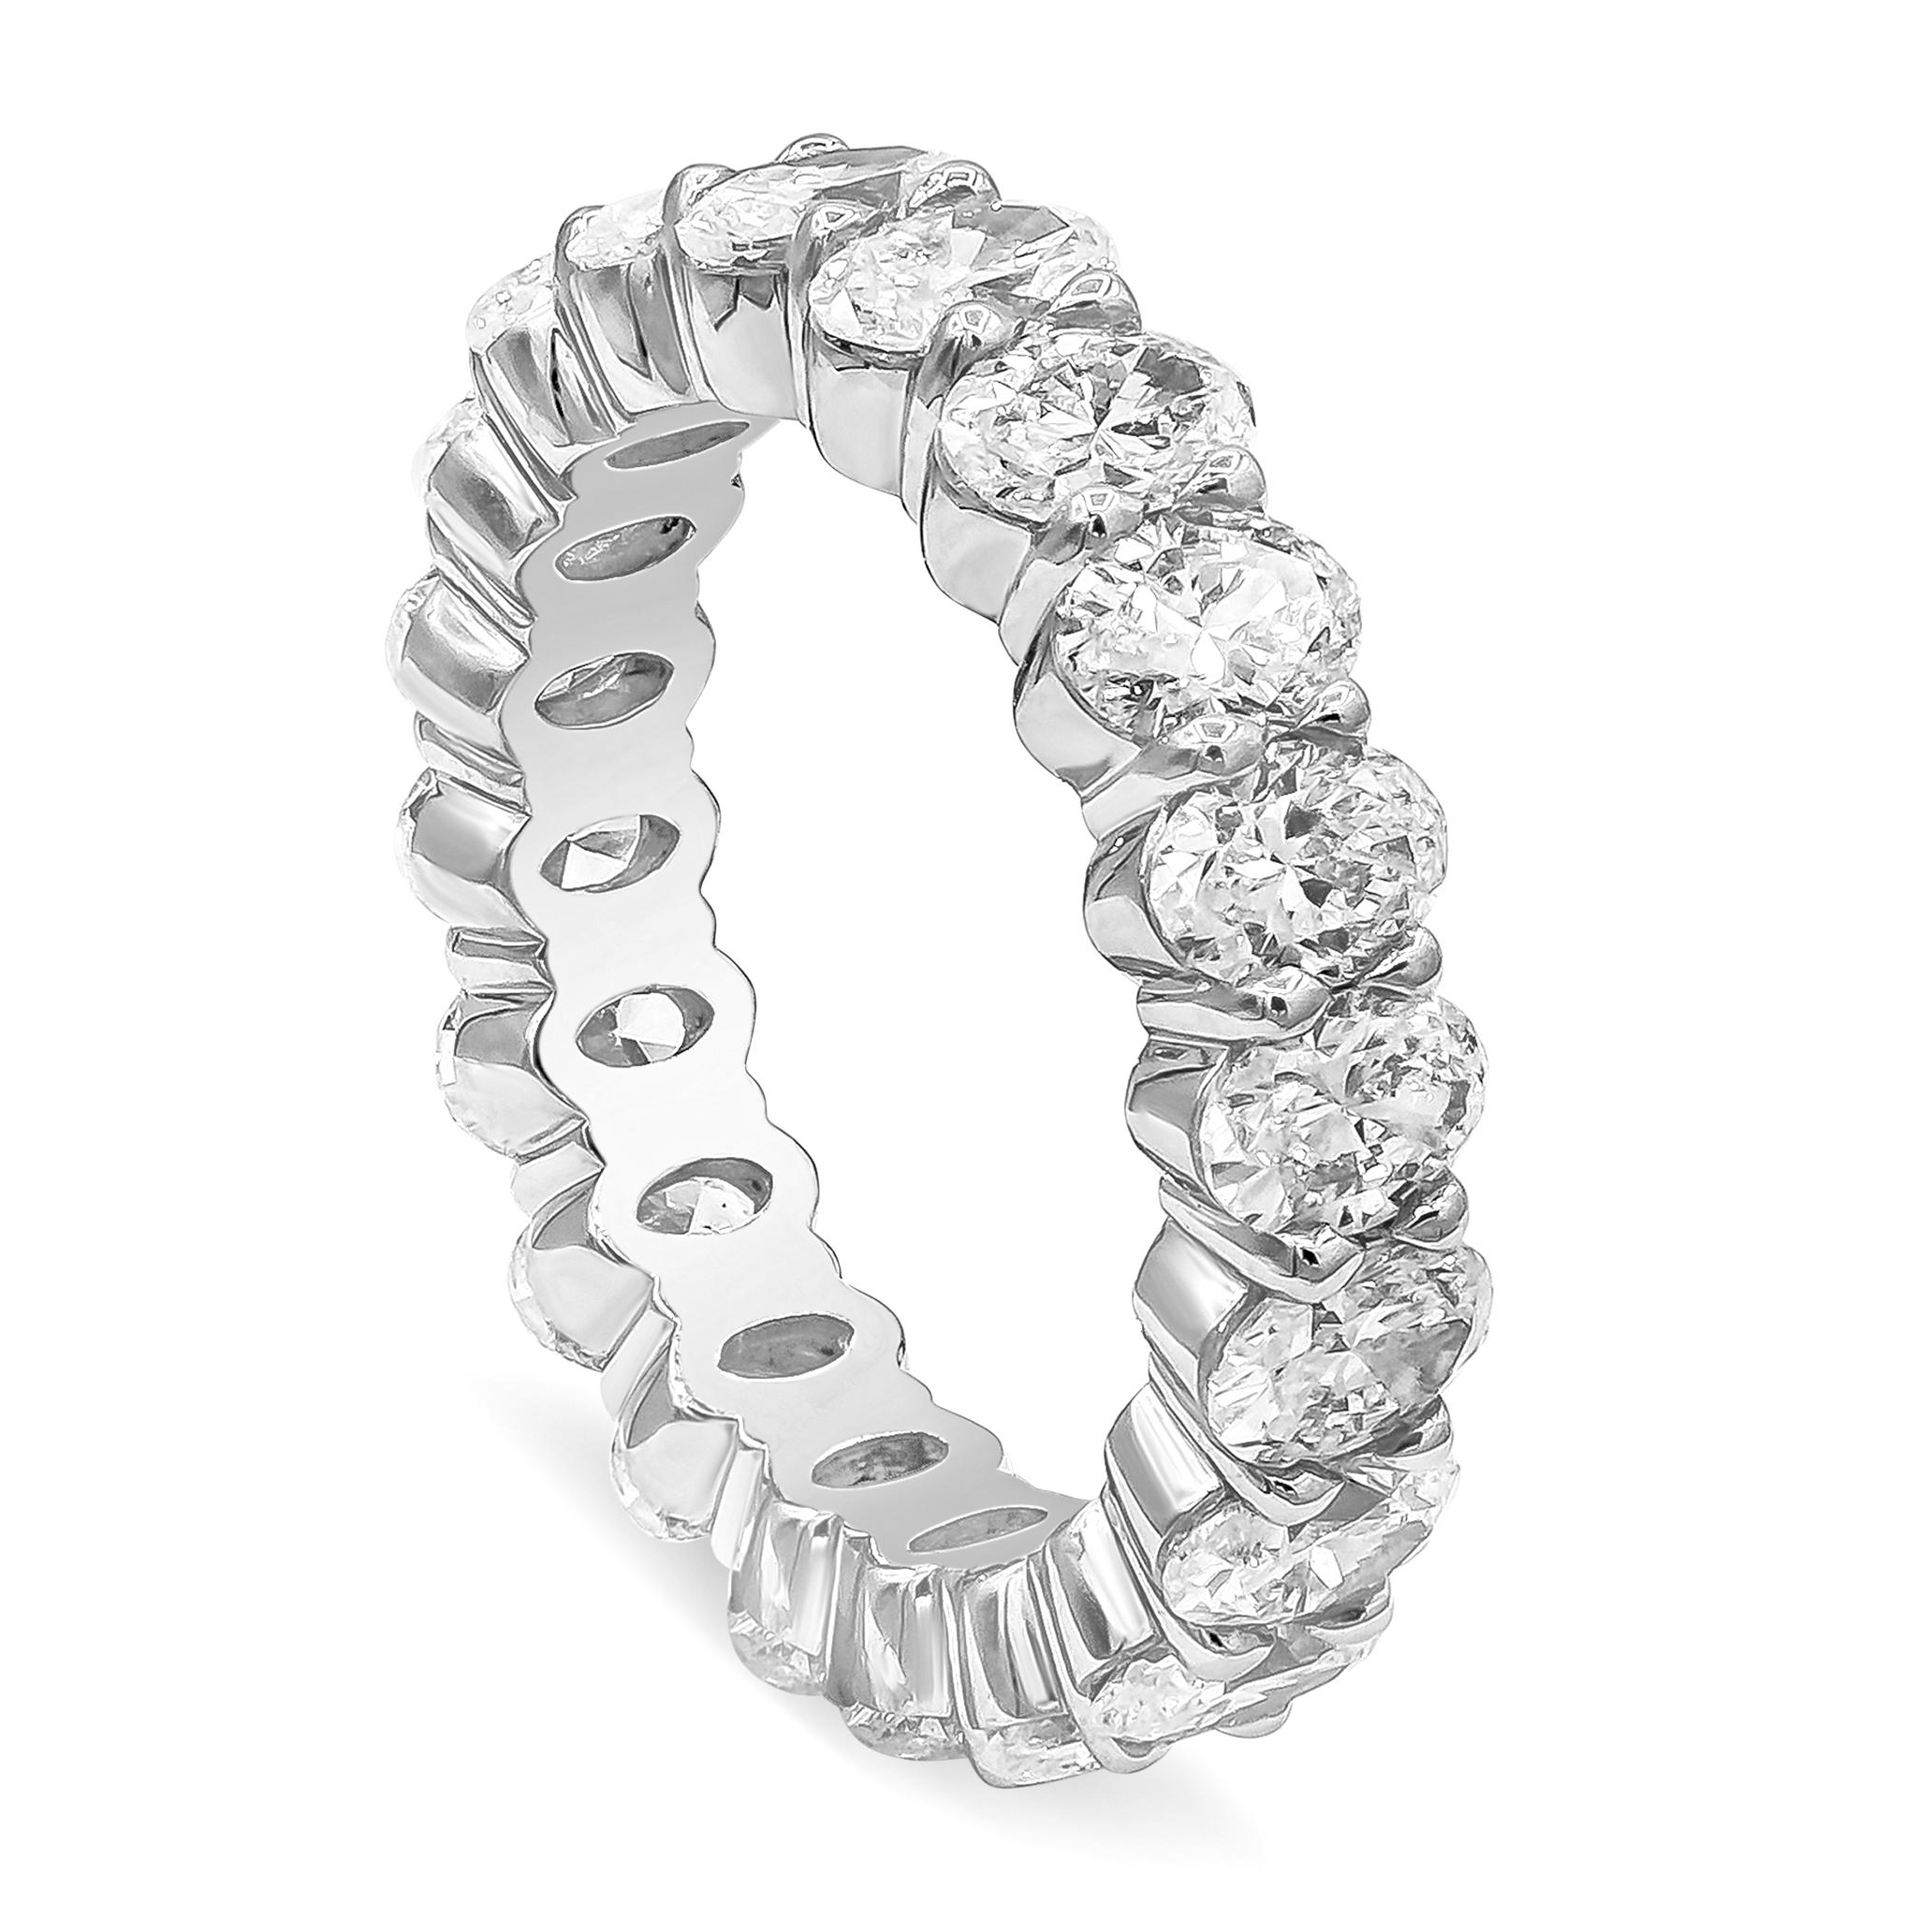 A brilliant eternity wedding band showcasing oval cut diamonds, weighing 7.50 carats total, G-H Color and VS-SI in Clarity. Made with Platinum, Size 6.25 US.

Roman Malakov is a custom house, specializing in creating anything you can imagine. If you